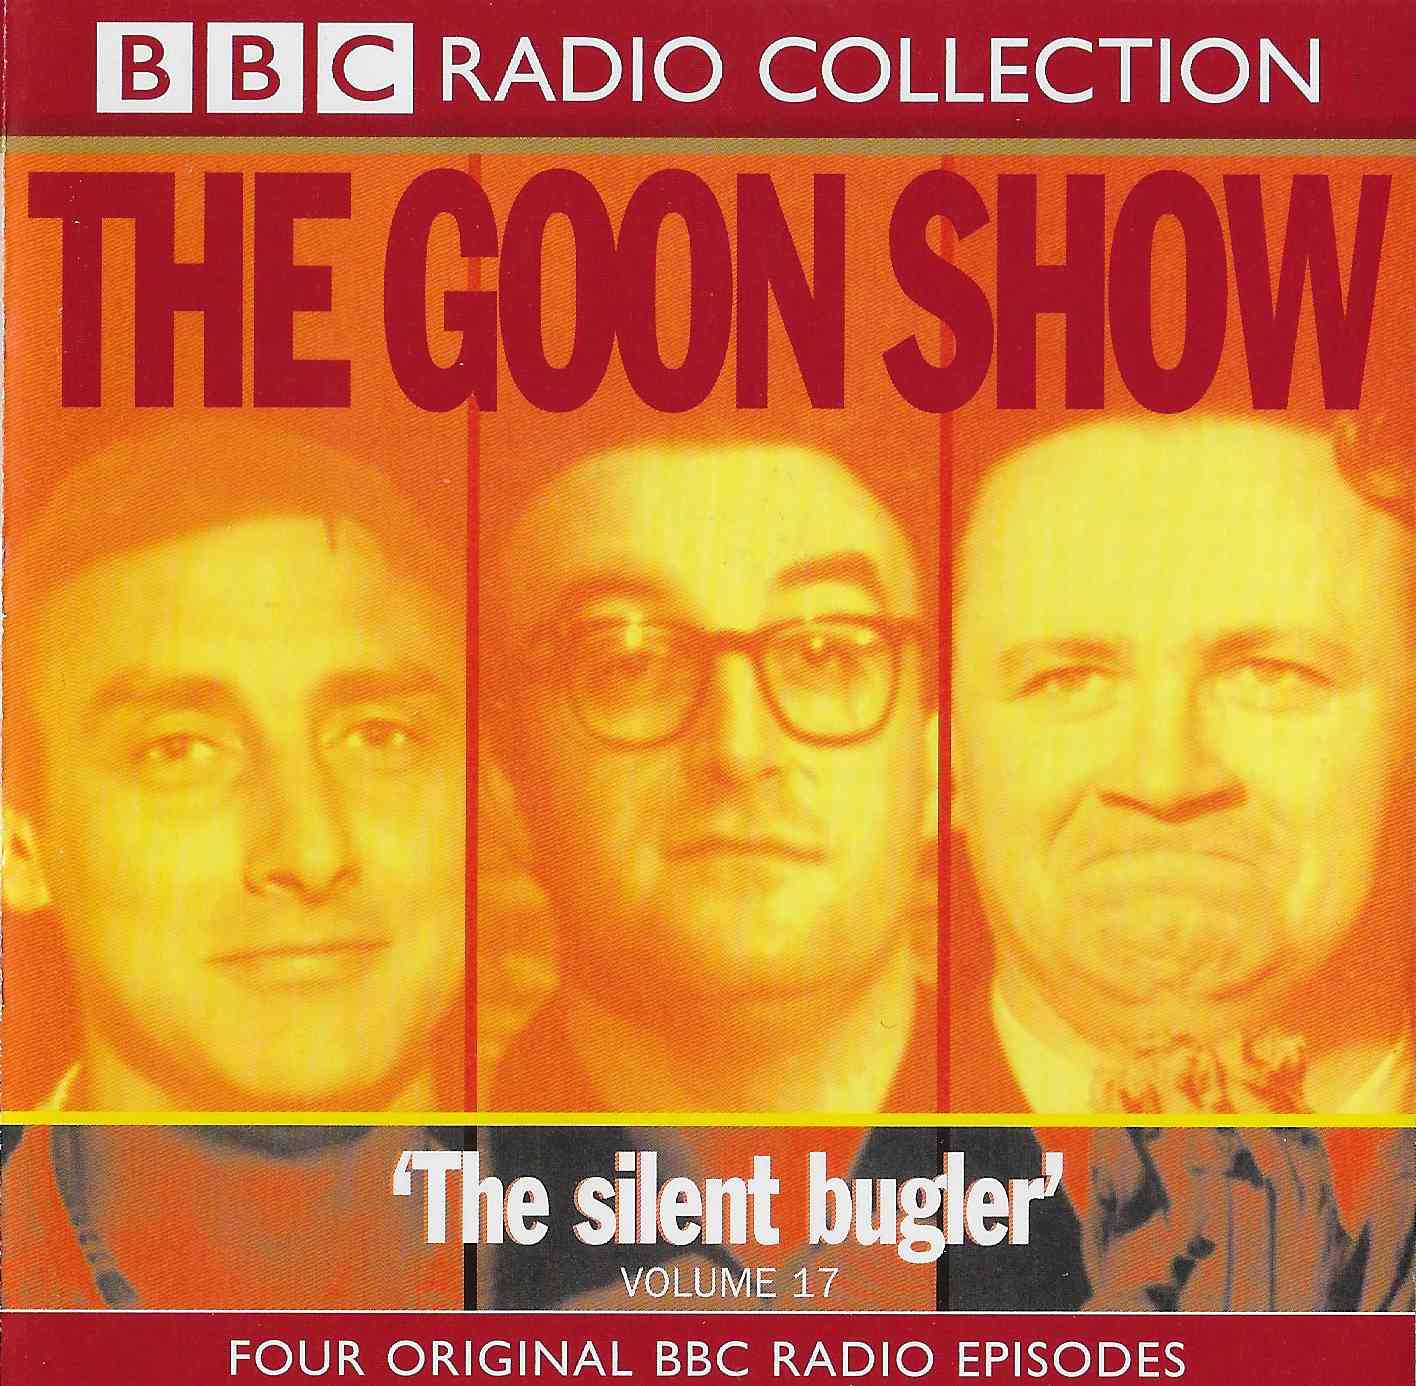 Picture of ISBN 978-0-563-55292-5 The Goon Show 17 - The silent bugler by artist Spike Milligan / Larry Stephens from the BBC cds - Records and Tapes library